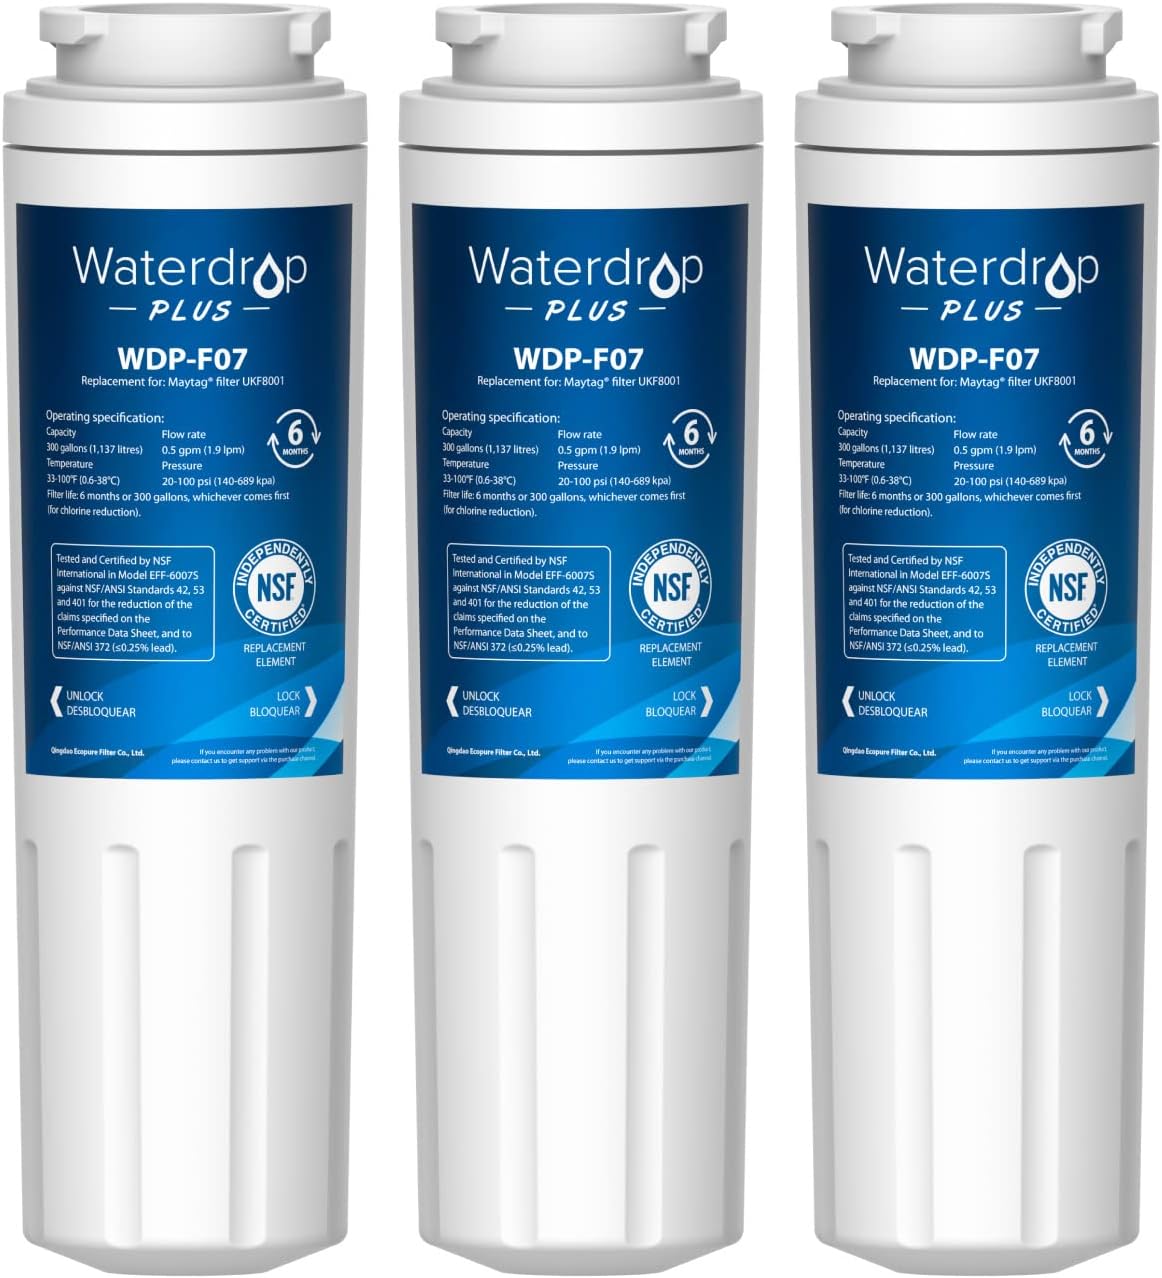 NEW SEALED Refrigerator Water Filter RFC0900A Maytag Kenmore Whirlpool Amana